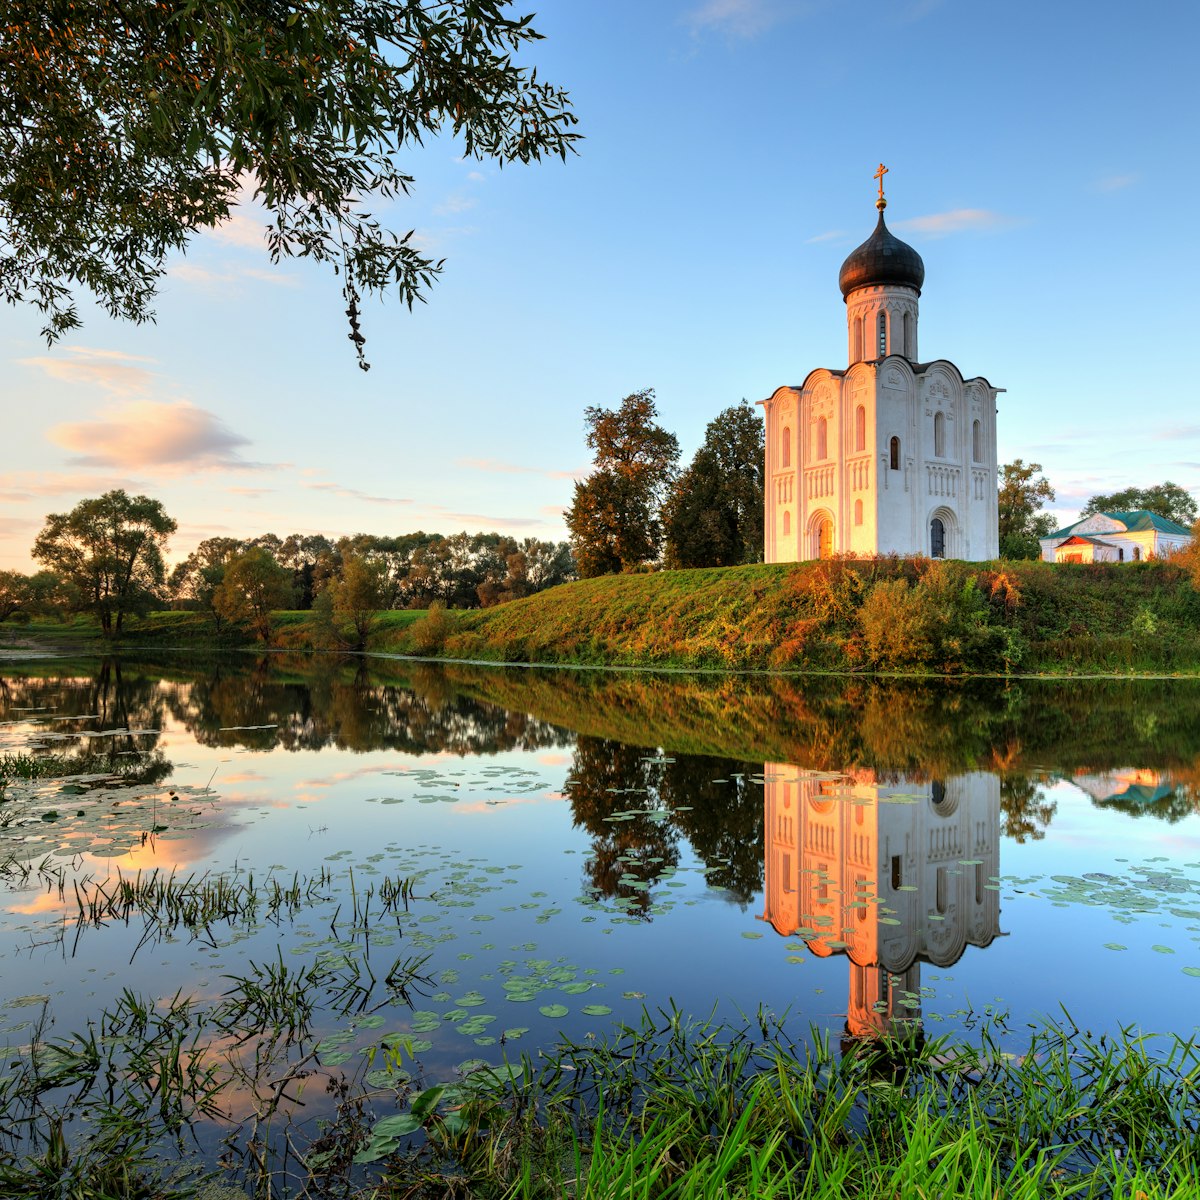 Church of the Intercession on the Nerl. Built in 12th century. Bogolyubovo, Vladimir region, Golden Ring of Russia; Shutterstock ID 225392860; Your name (First / Last): Josh Vogel; Project no. or GL code: 56530; Network activity no. or Cost Centre: Online-Design; Product or Project: 65050/7529/Josh Vogel/LP.com Destination Galleries